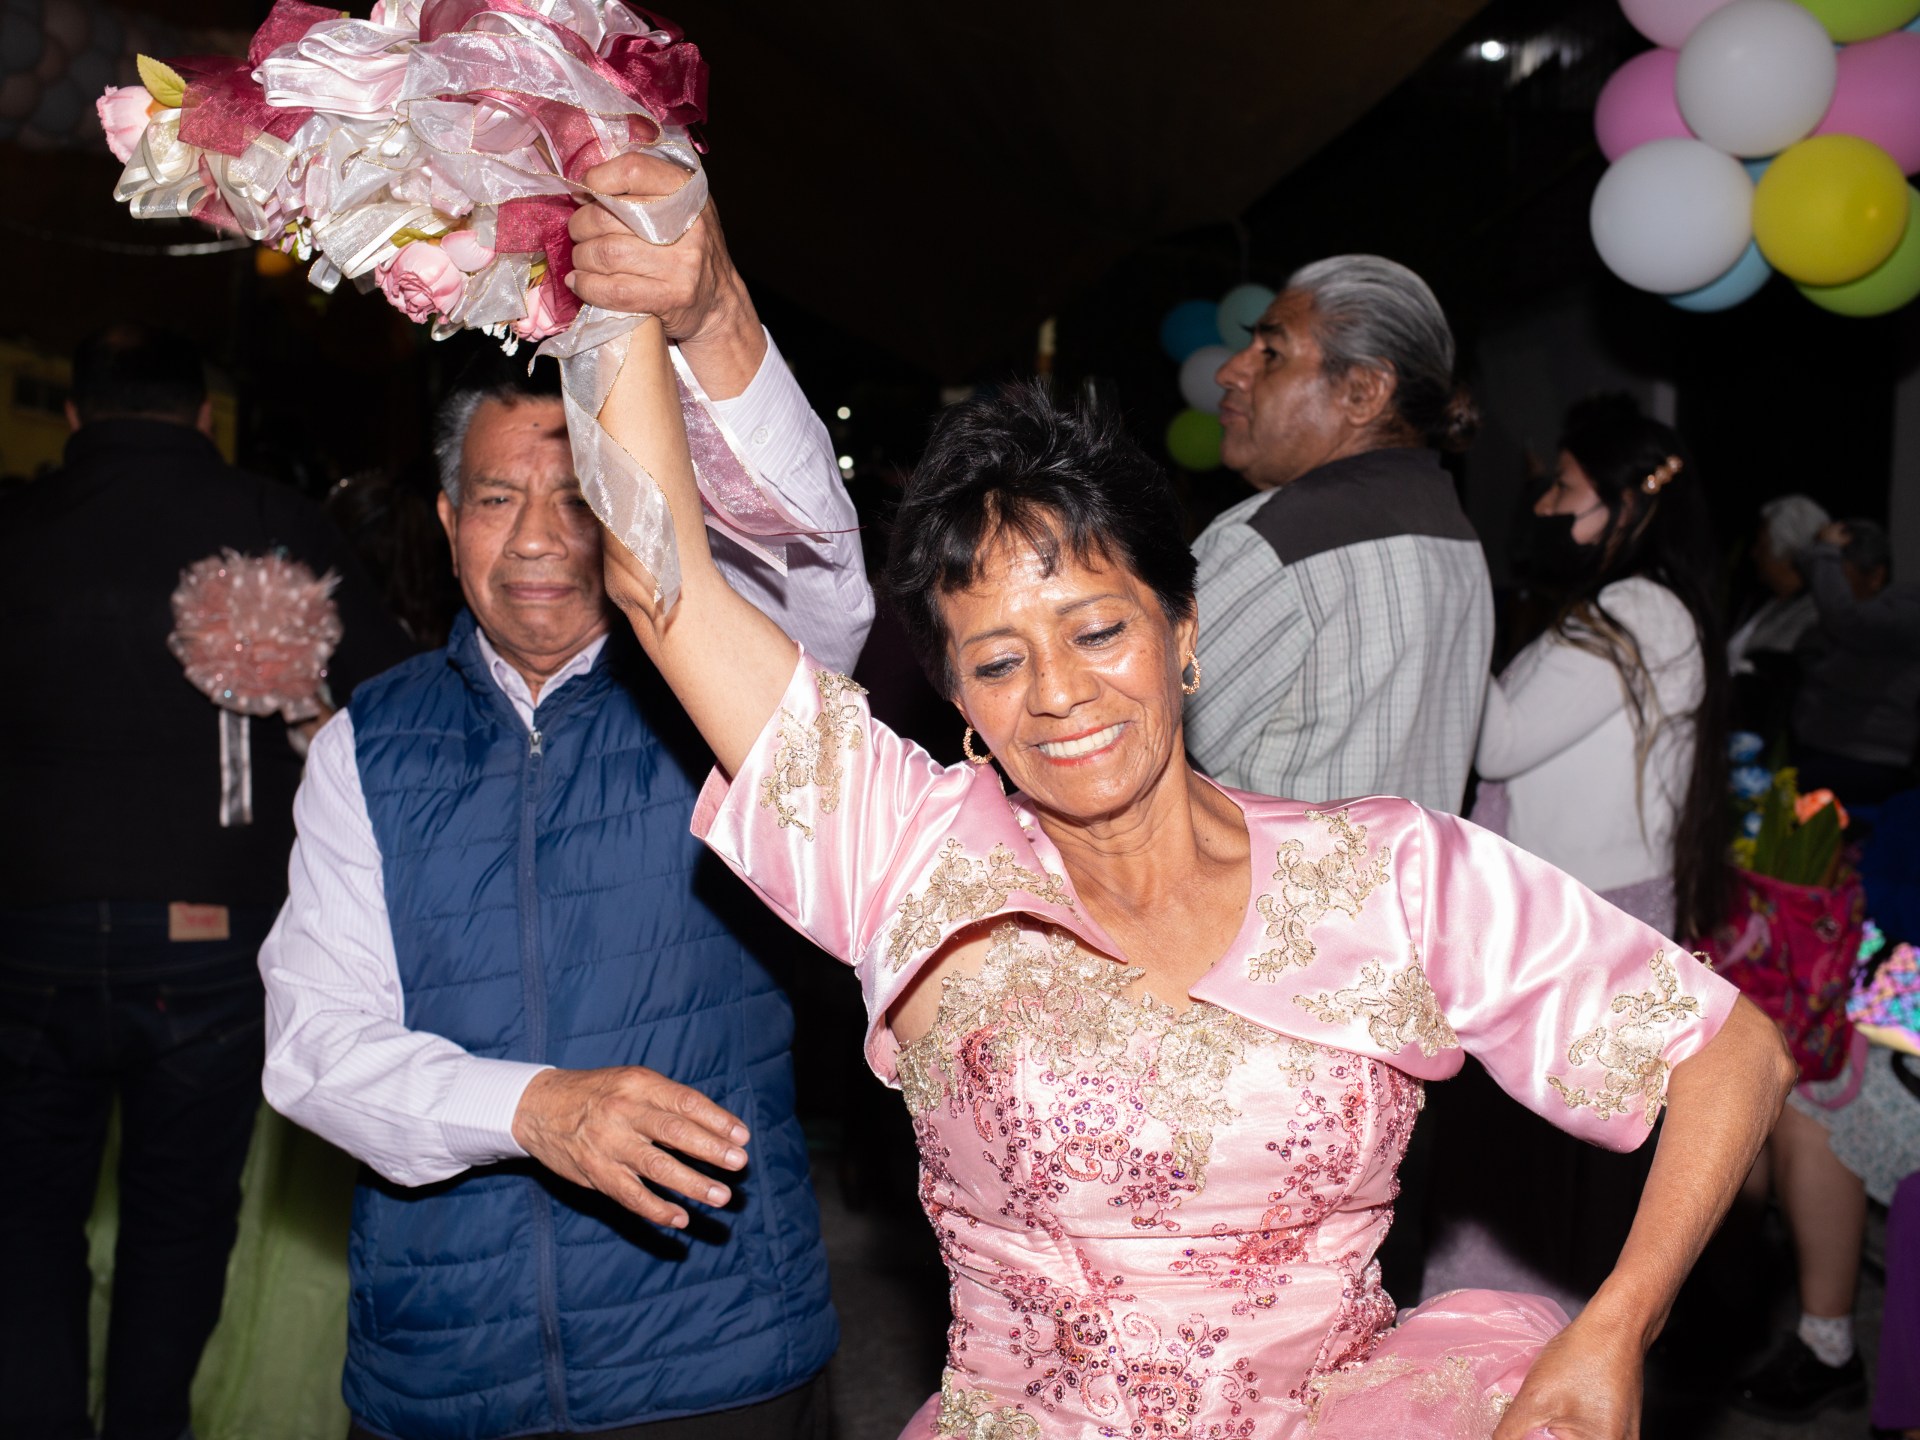 In Mexico, a community gathers to celebrate a quinceañera — for the elderly | Arts and Culture #Mexico #community #gathers #celebrate #quinceañera #elderly #Arts #Culture